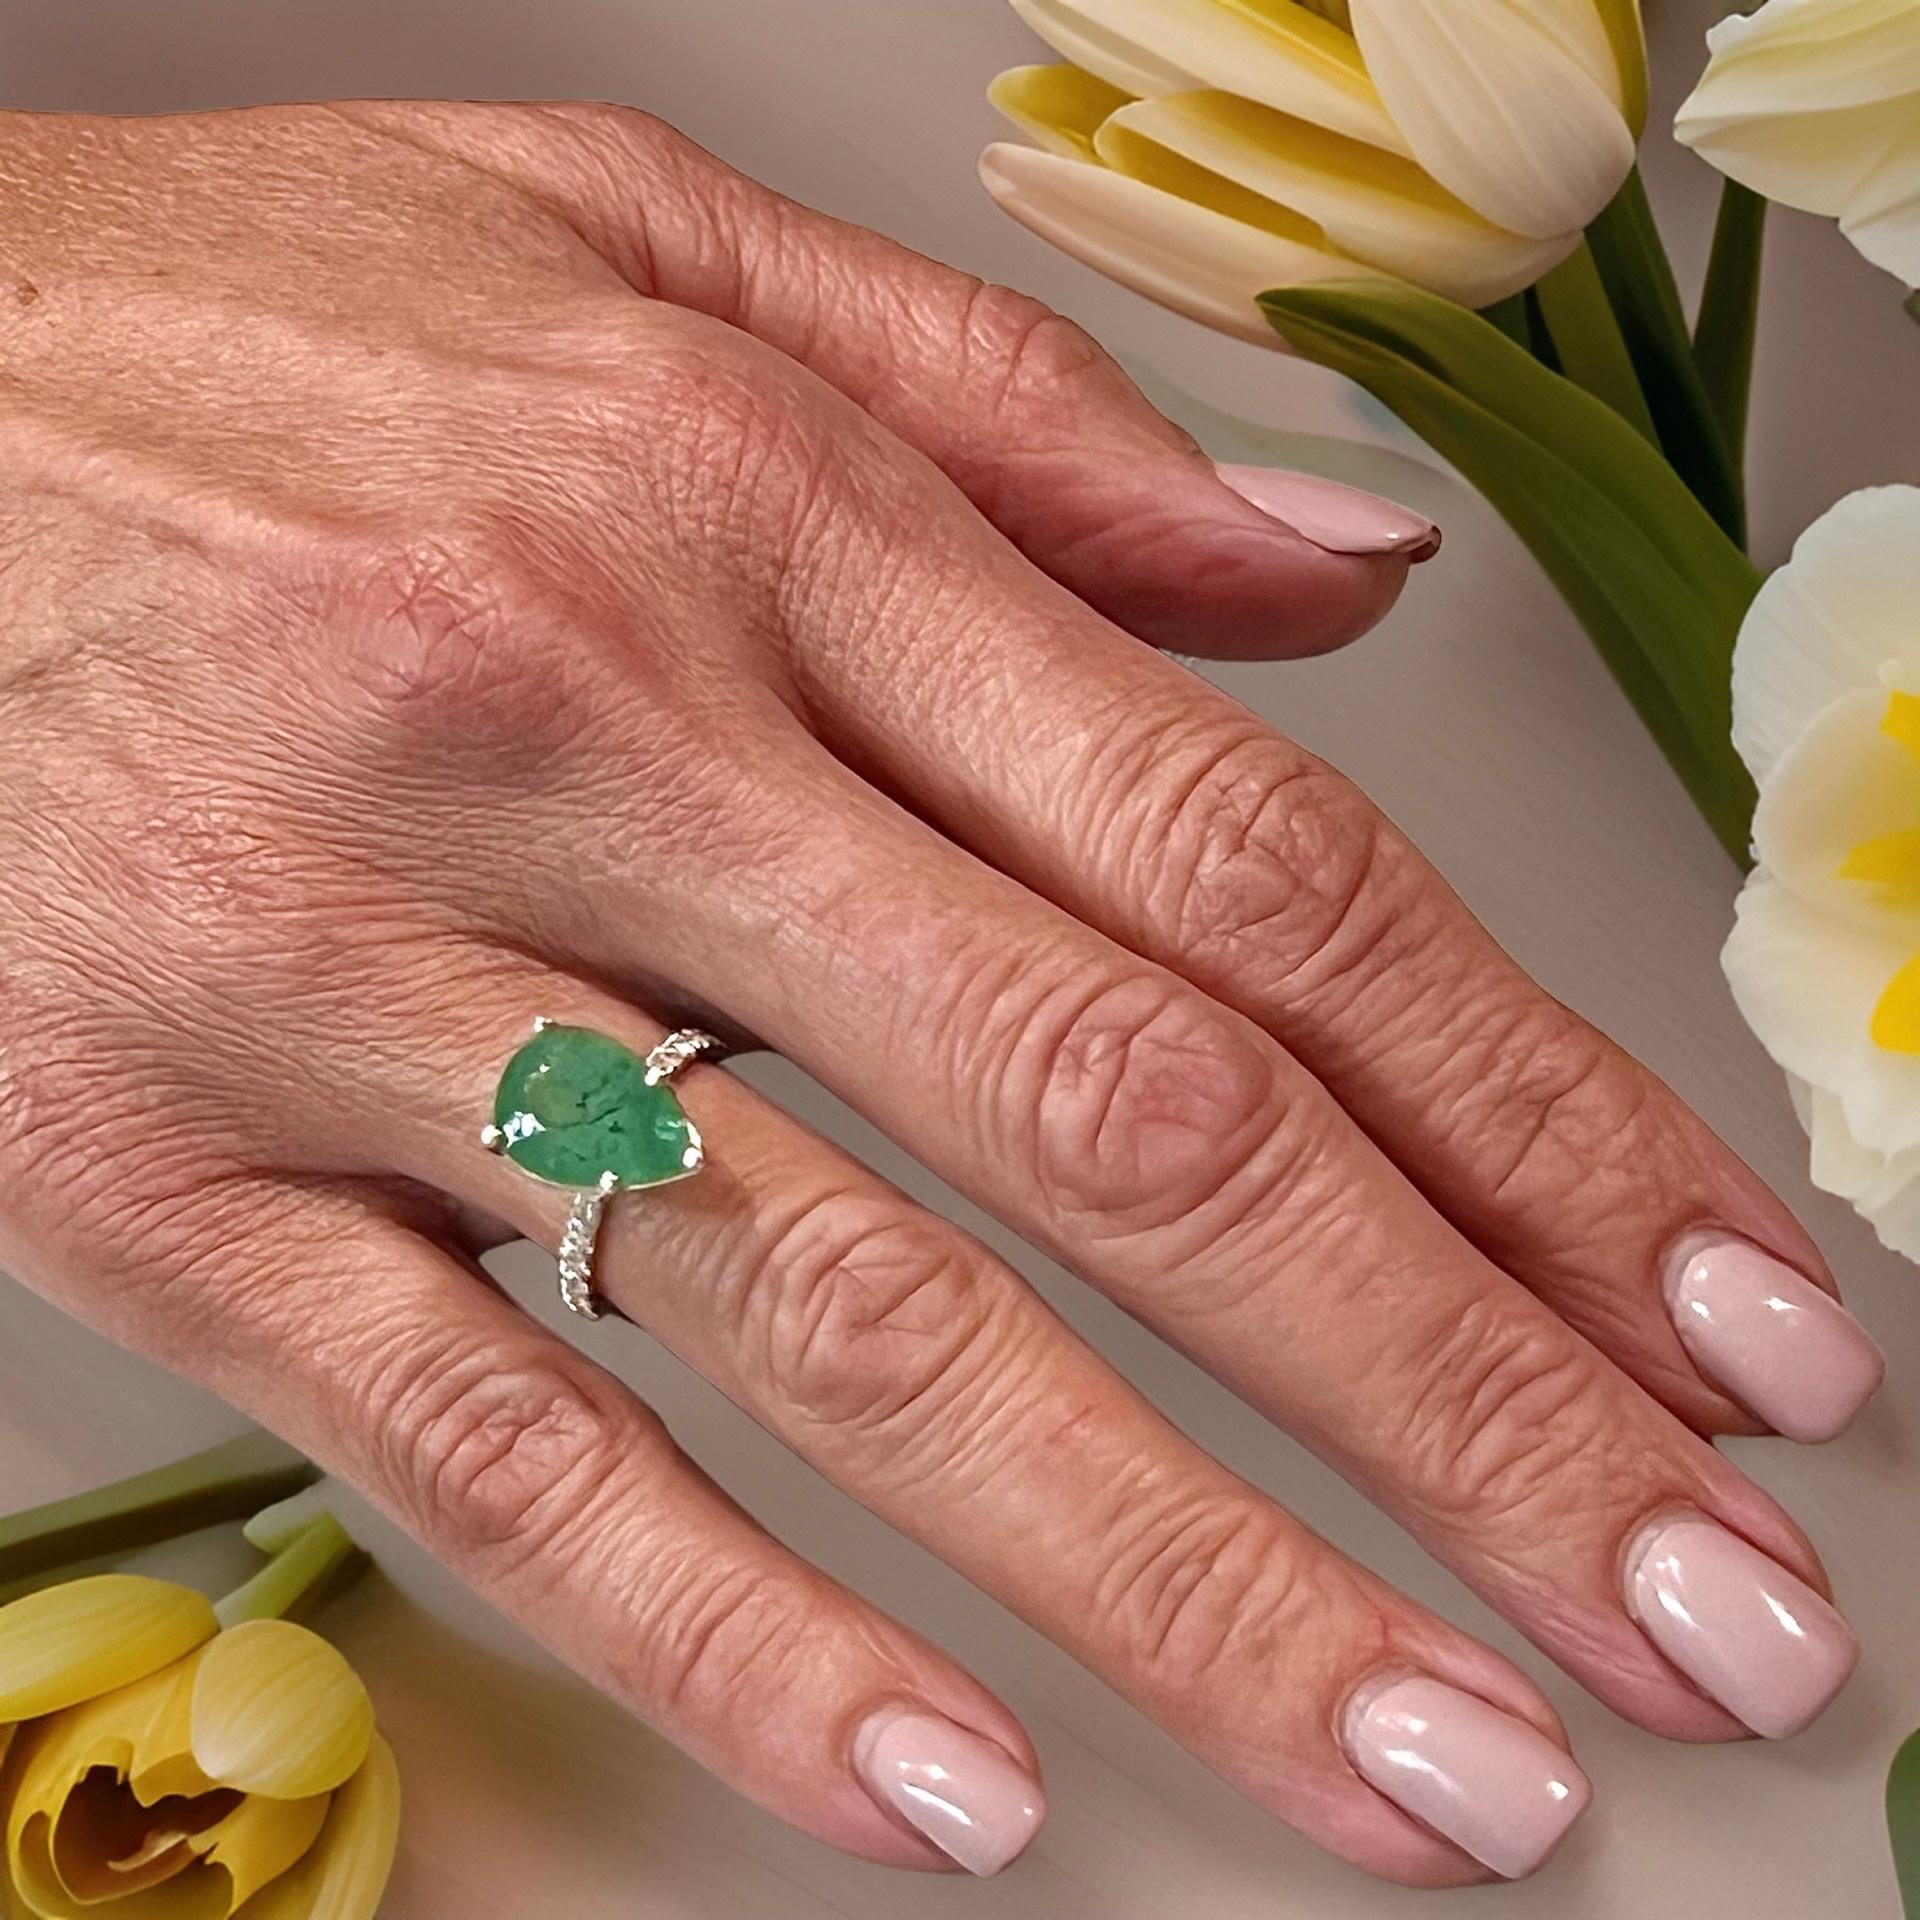 Natural Emerald and Diamond Ring 6.5 14k WG 4.62 TCW Certified $4,950 310549

Nothing says, “I Love you” more than Diamonds and Pearls!

This Emerald ring has been Certified, Inspected, and Appraised by Gemological Appraisal Laboratory

Gemological